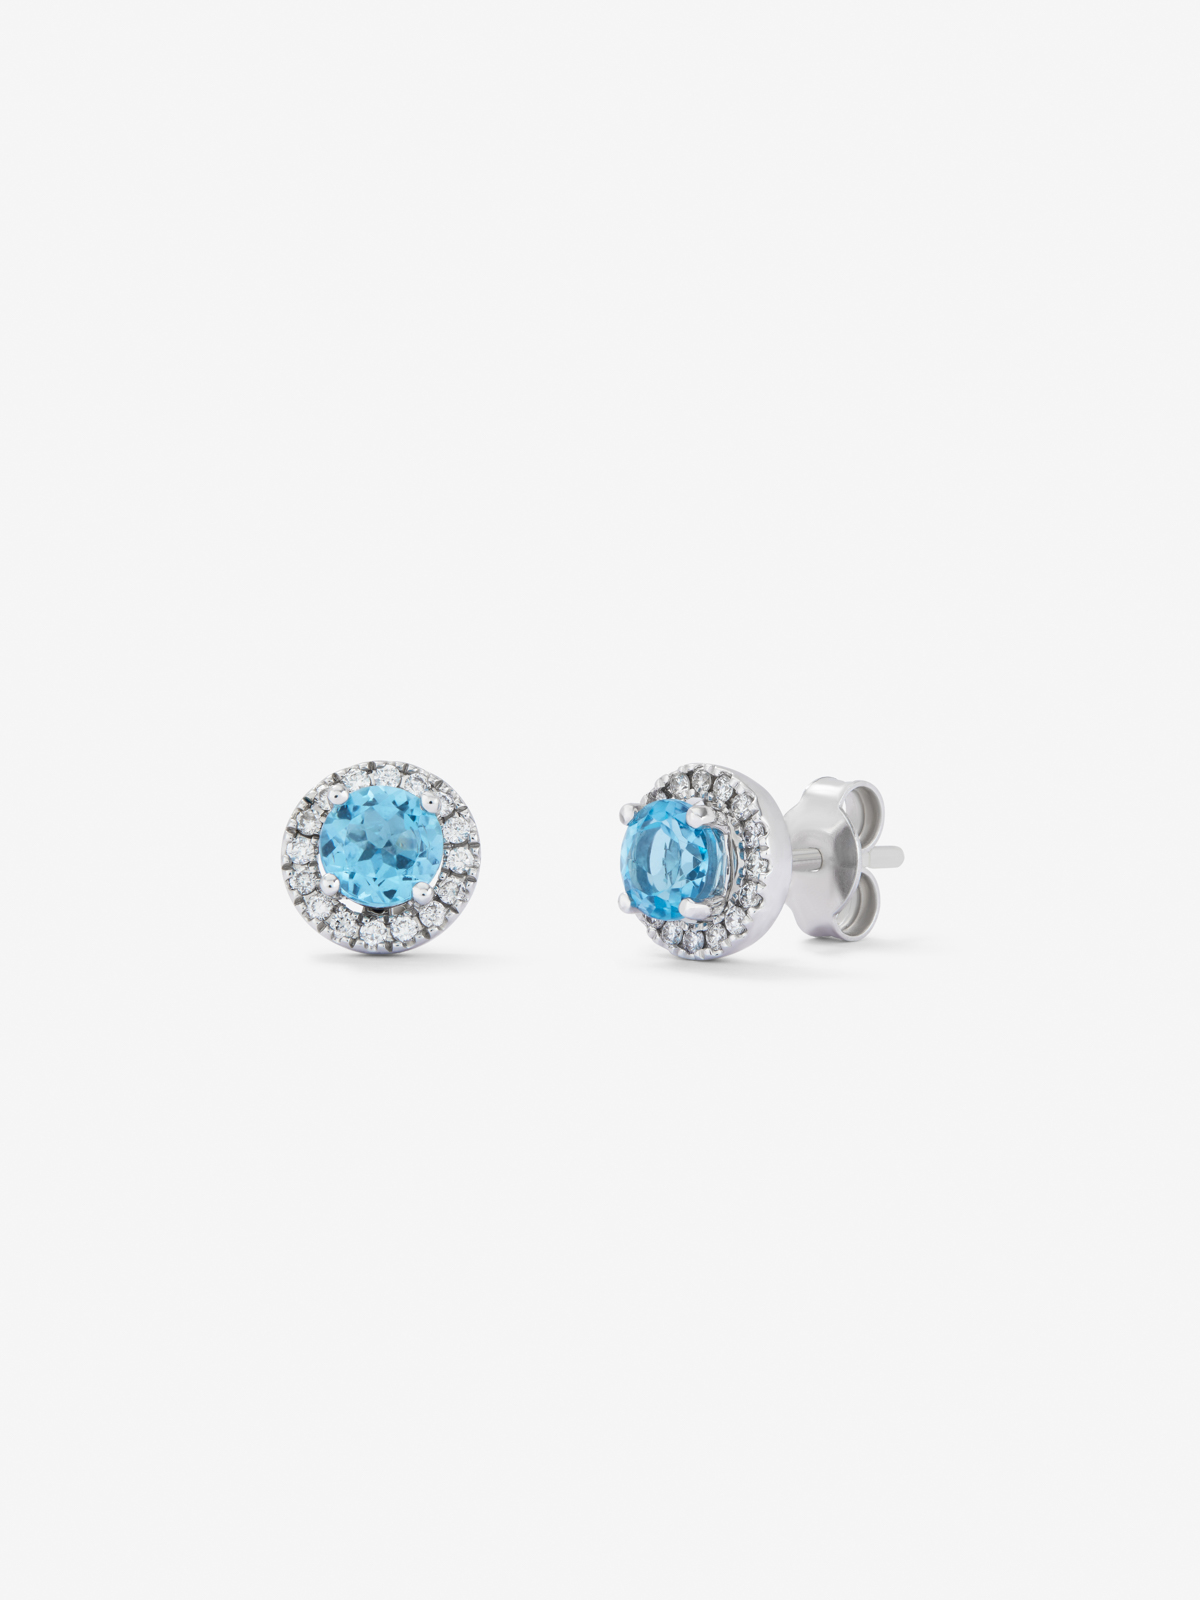 18K white gold earrings with 0.17 cts diamonds and swiss blue 1.26cts